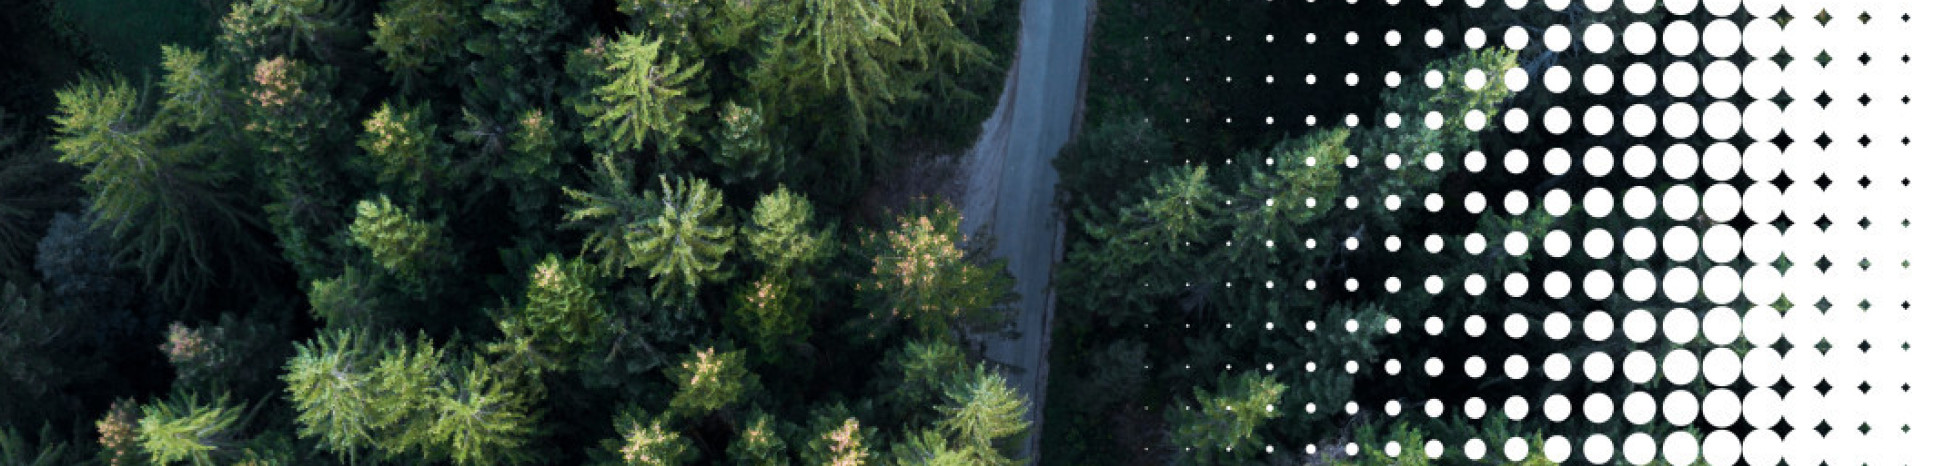 Aerial photo of pine trees